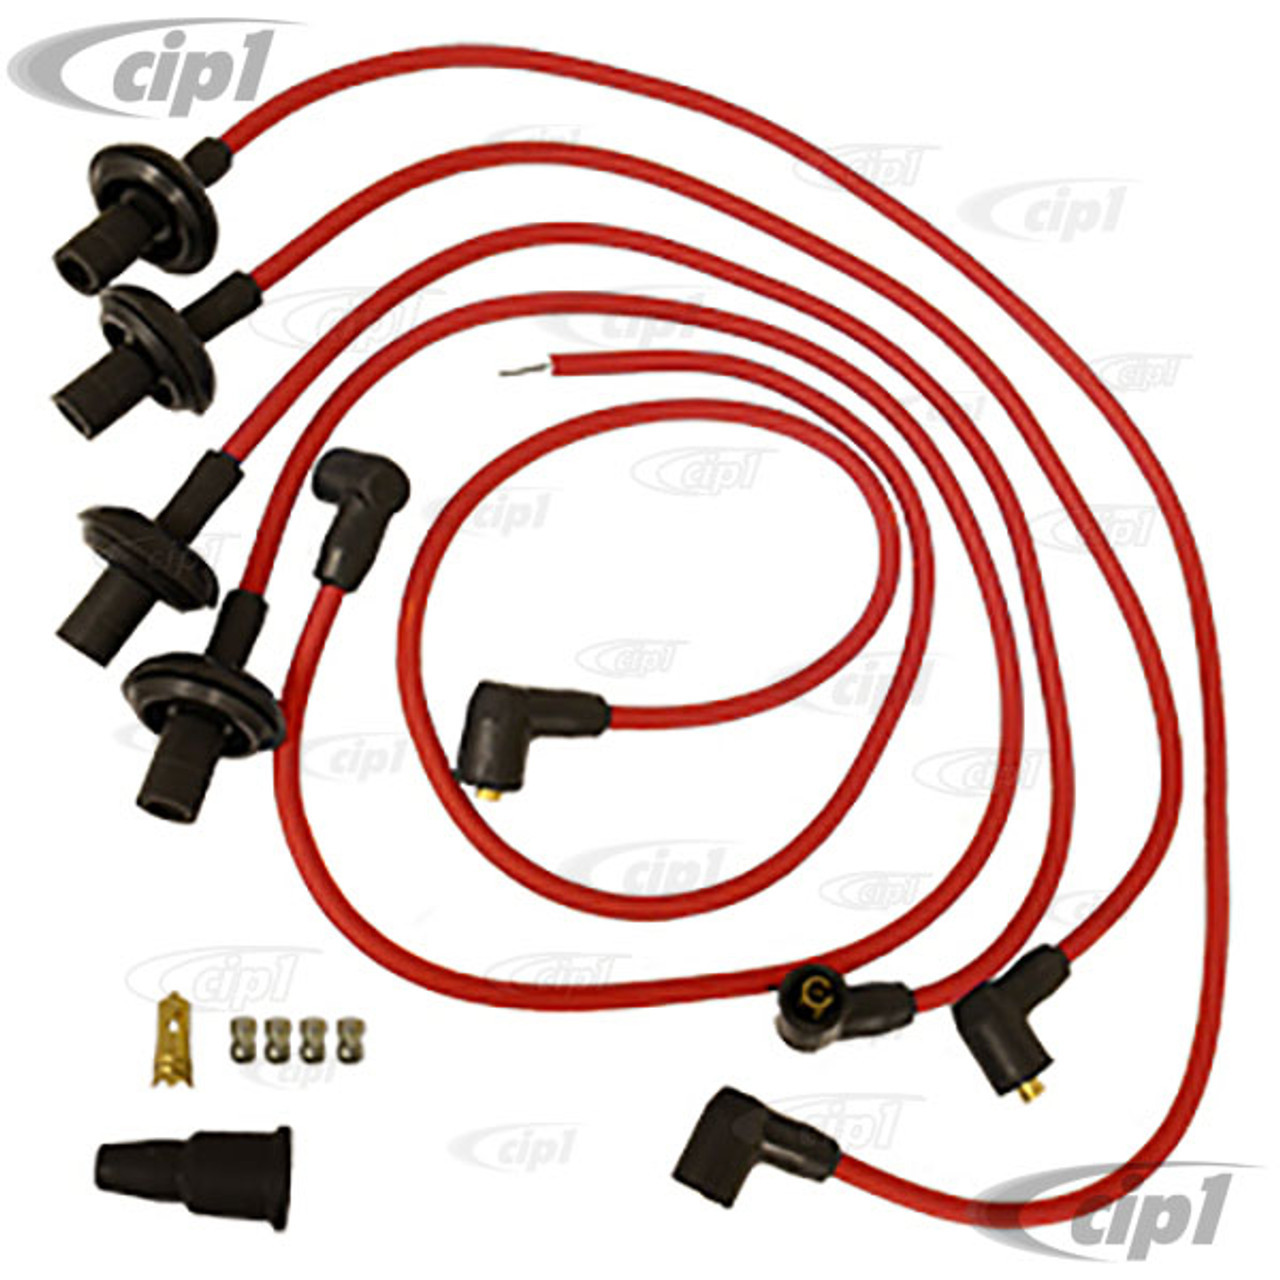 C13-9391 - SUPPRESSED IGNITION WIRE SET WITH 90 DEGREE CAP ENDS